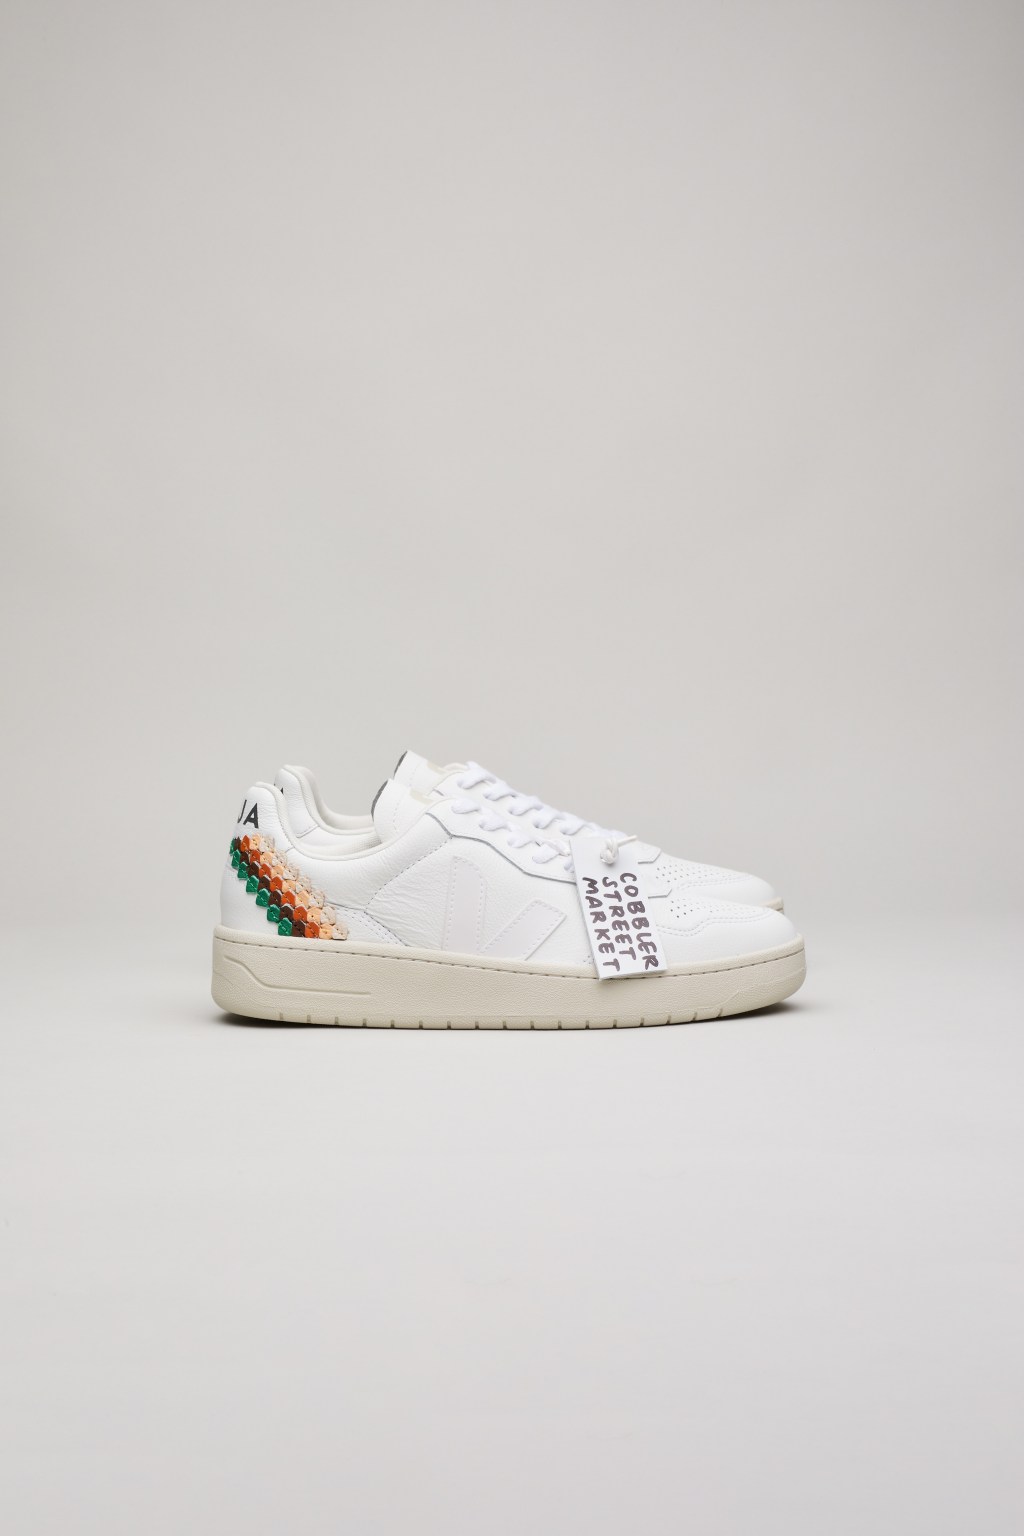 veja-partners-with-dover-street-market-on-sneaker collection